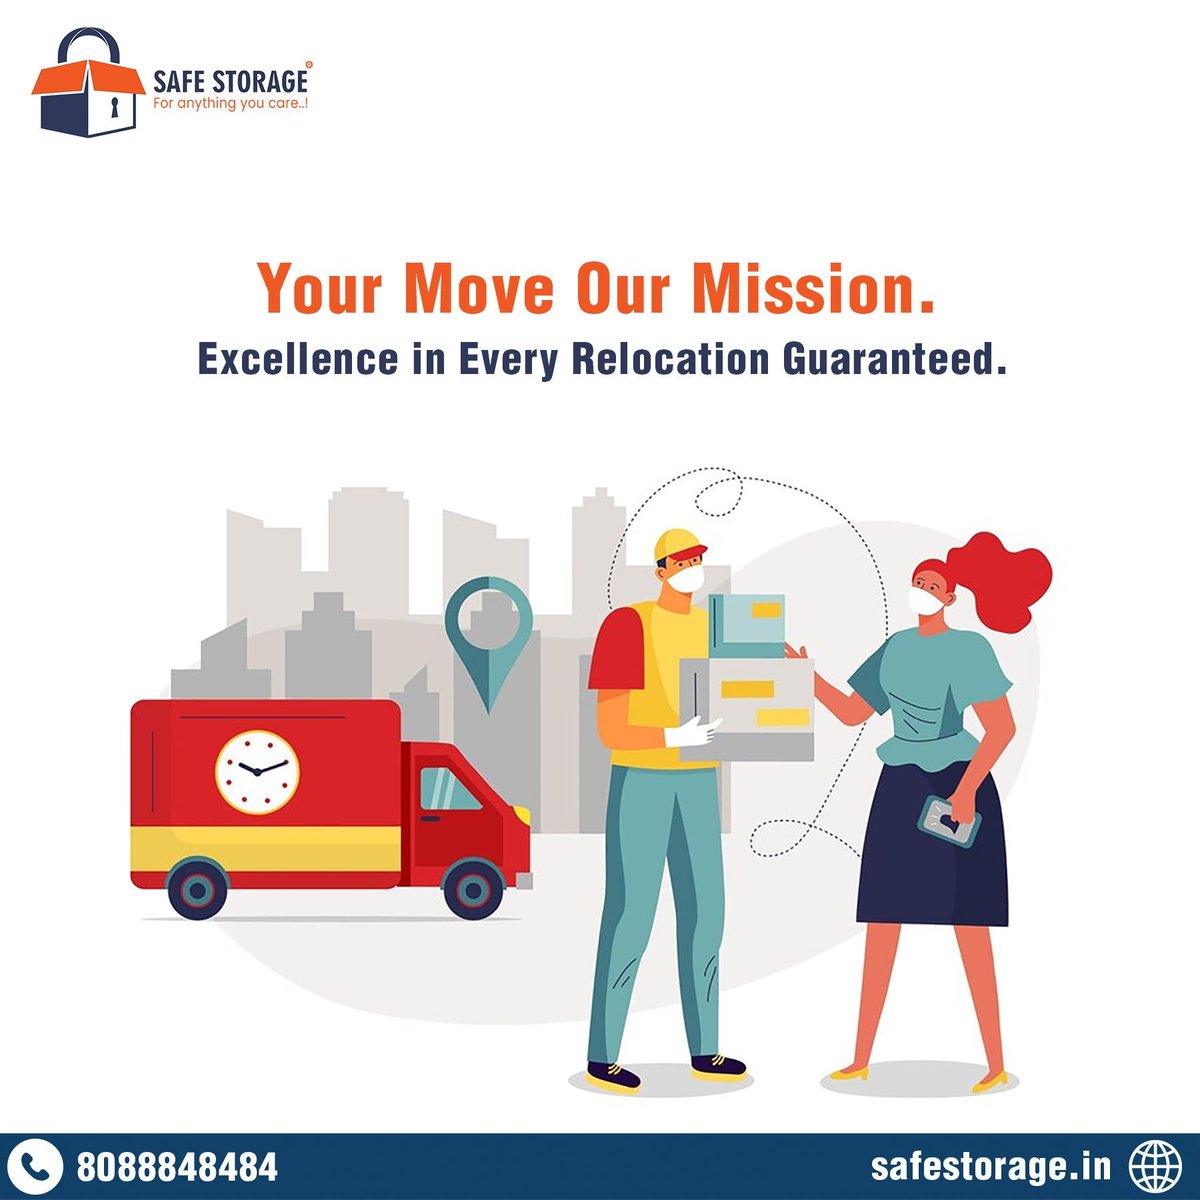 Seamless transitions, secured treasures. SafeStorage ensures excellence in every relocation, promising unmatched security for your belongings. 

Our website -buff.ly/2pK6eaM
Call now: 8088848484
#SafeStorage #StorageFacility #SelfStorage #explore #RelocationExcellence